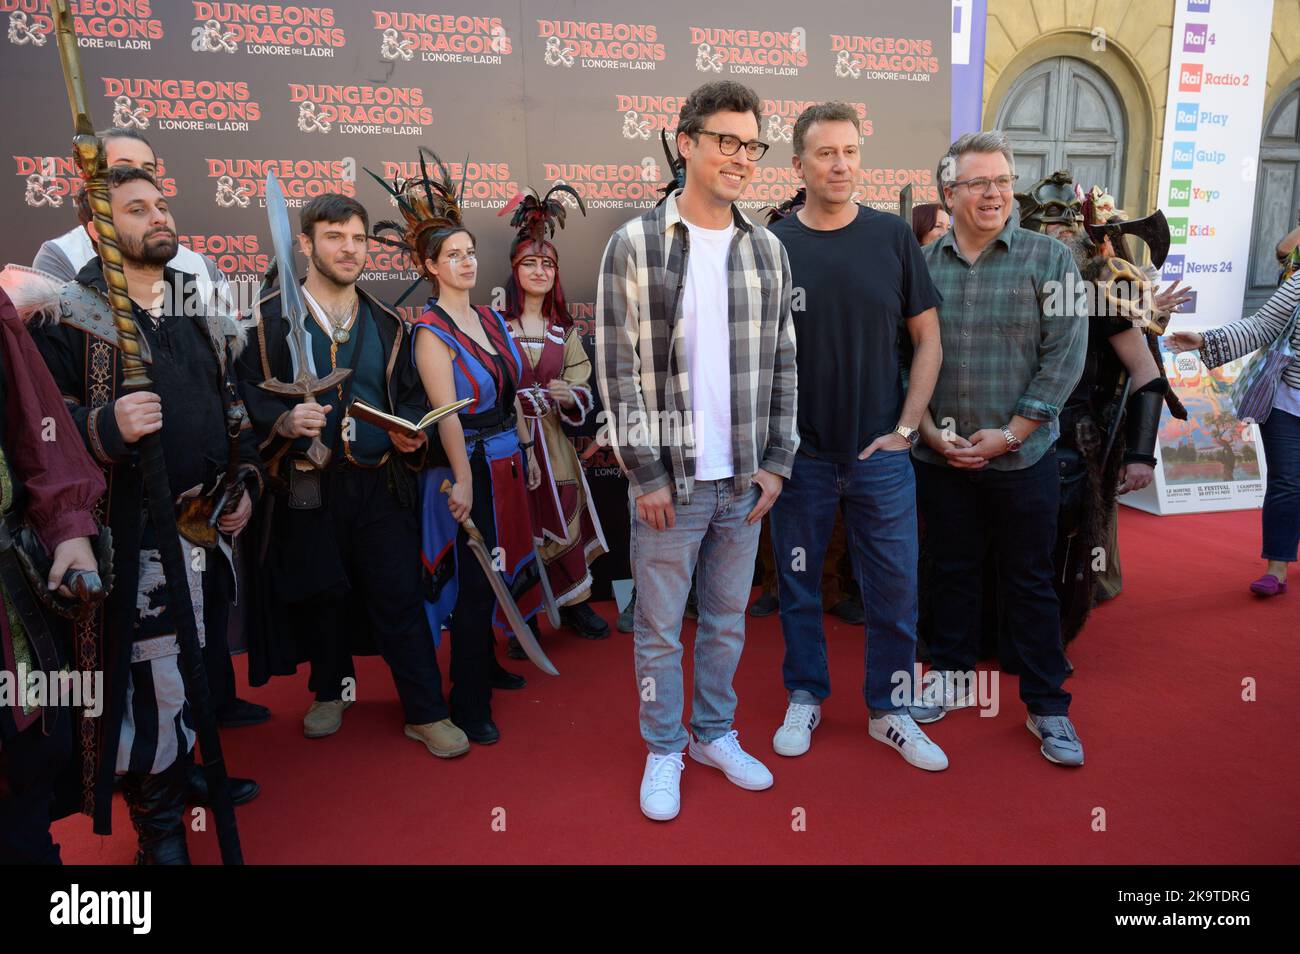 Lucca, Italy. 29th Oct, 2022. Lucca, Italy - October 29, 2022: Preview of the film Dungeons and dragons the honor of thieves at Lucca Comics and Games 2022, in the photo directors Jonathan Goldstein, John Francis Daley, and producer Jeremy Latcham. Credit: Stefano Dalle Luche/Alamy Live News Stock Photo